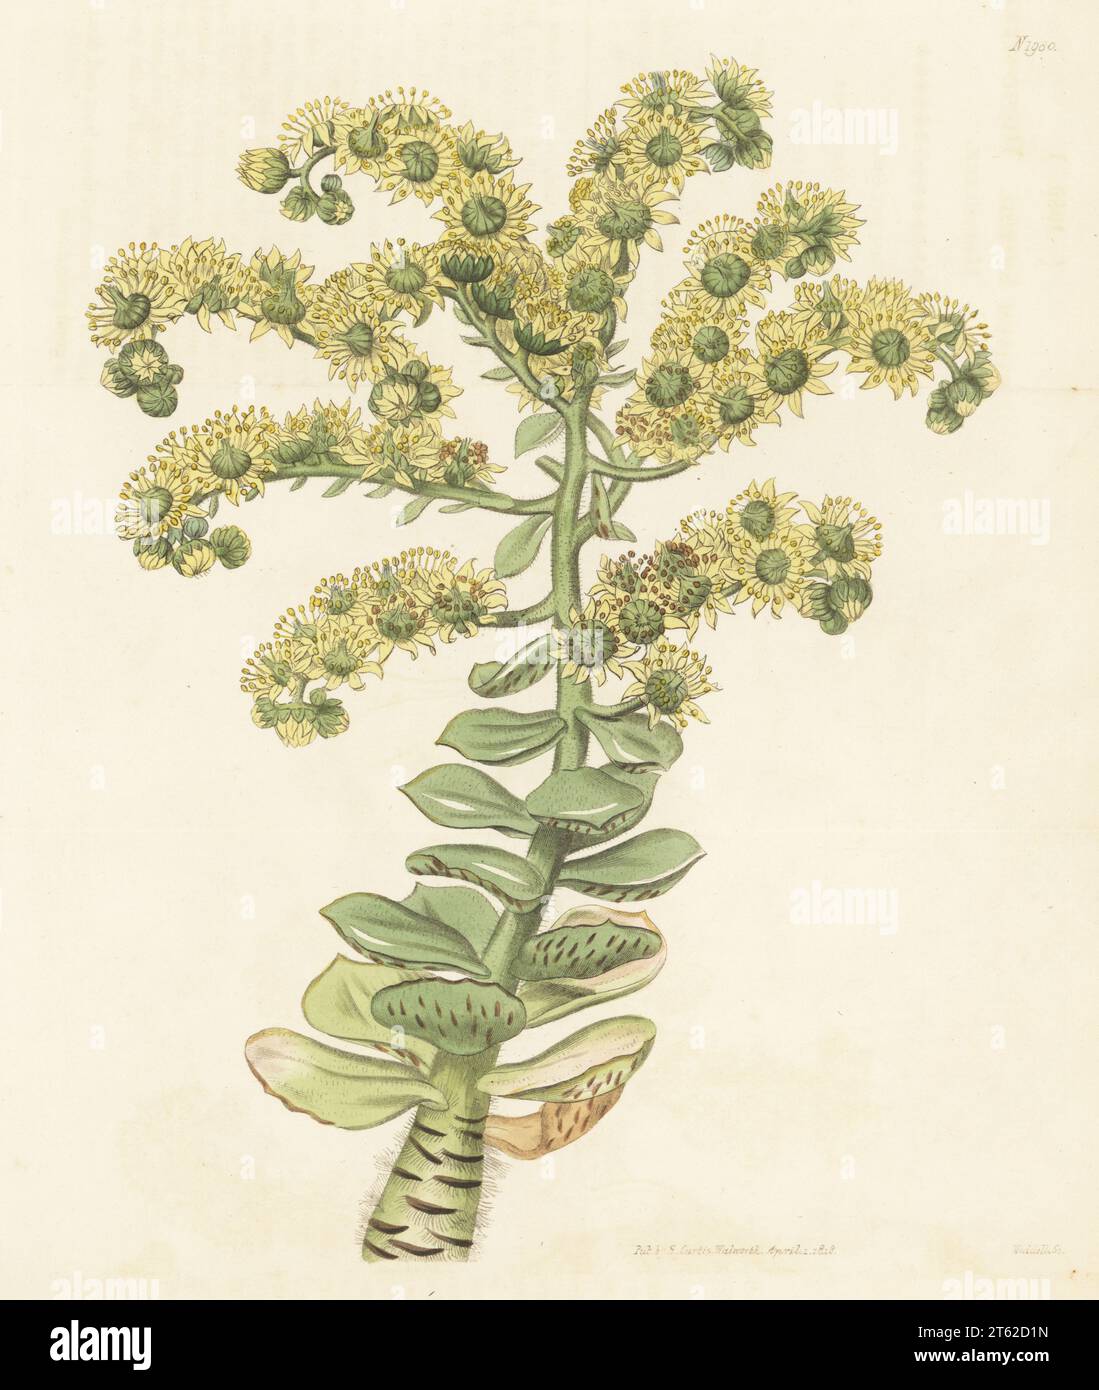 Tree houseleek, Aeonium smithii. Native to the Canary Islands, Tenerife, raised by William Anderson of the Apothecaries botanical garden at Chelsea. Hispid-stemmed houseleek, Sempervivum smithii. Handcoloured copperplate engraving by Weddell after a botanical illustration by an unknown artist from Curtis’s Botanical Magazine, edited by John Sims, London, 1818. Stock Photo